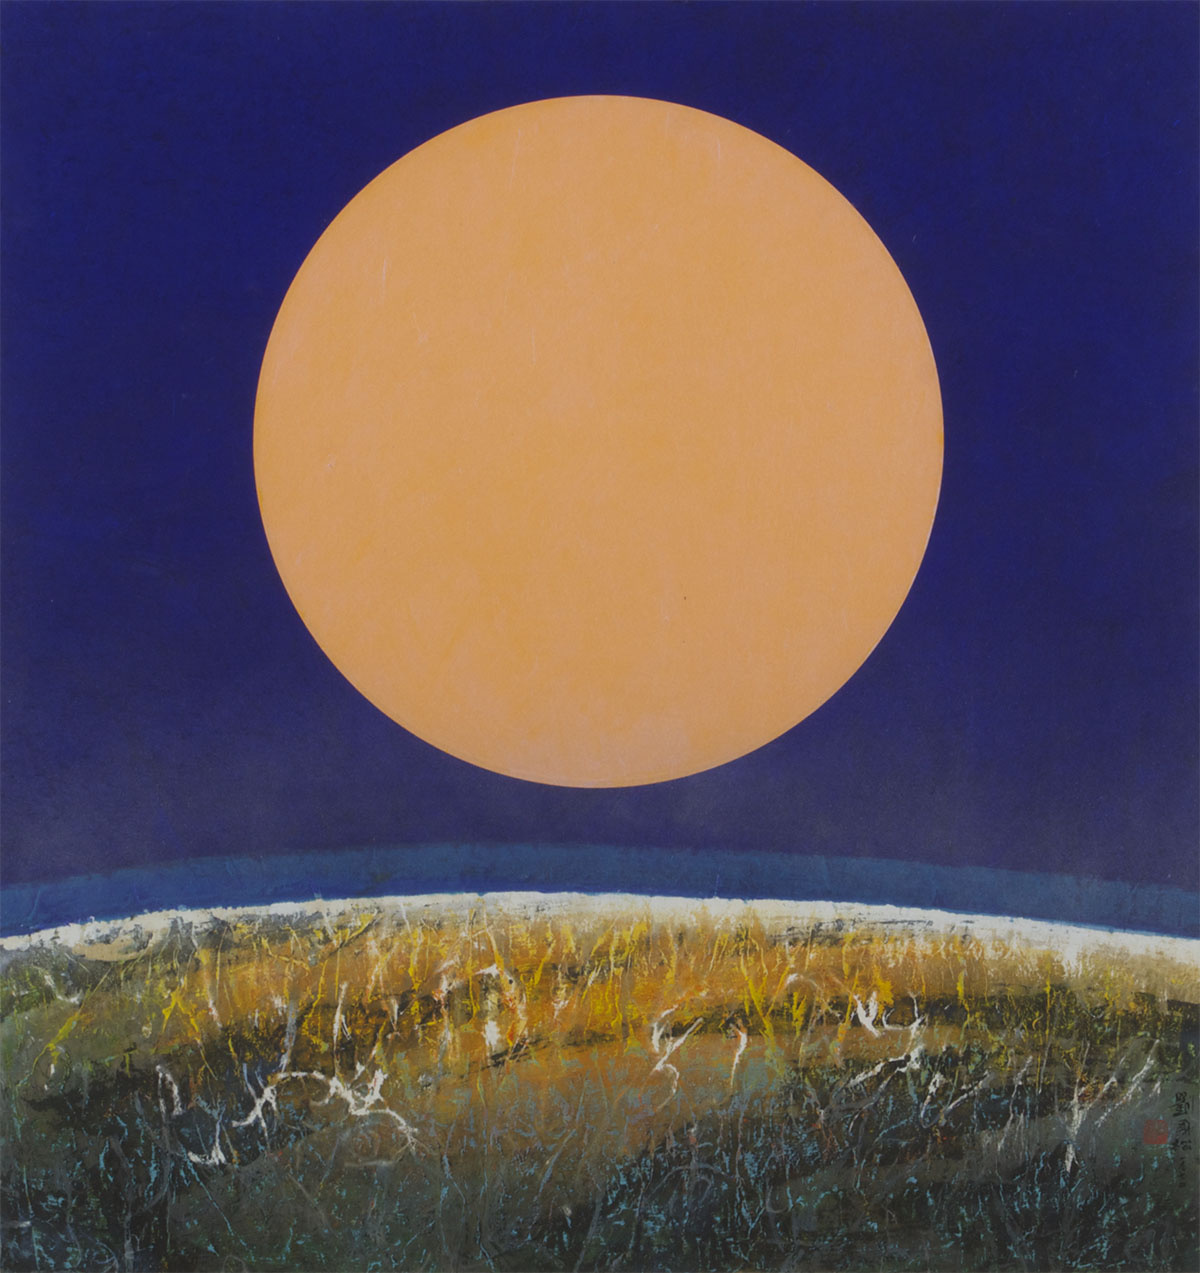 Liu Kuo-sung,<i> The Moon Hanging in the Sky,</i>1970